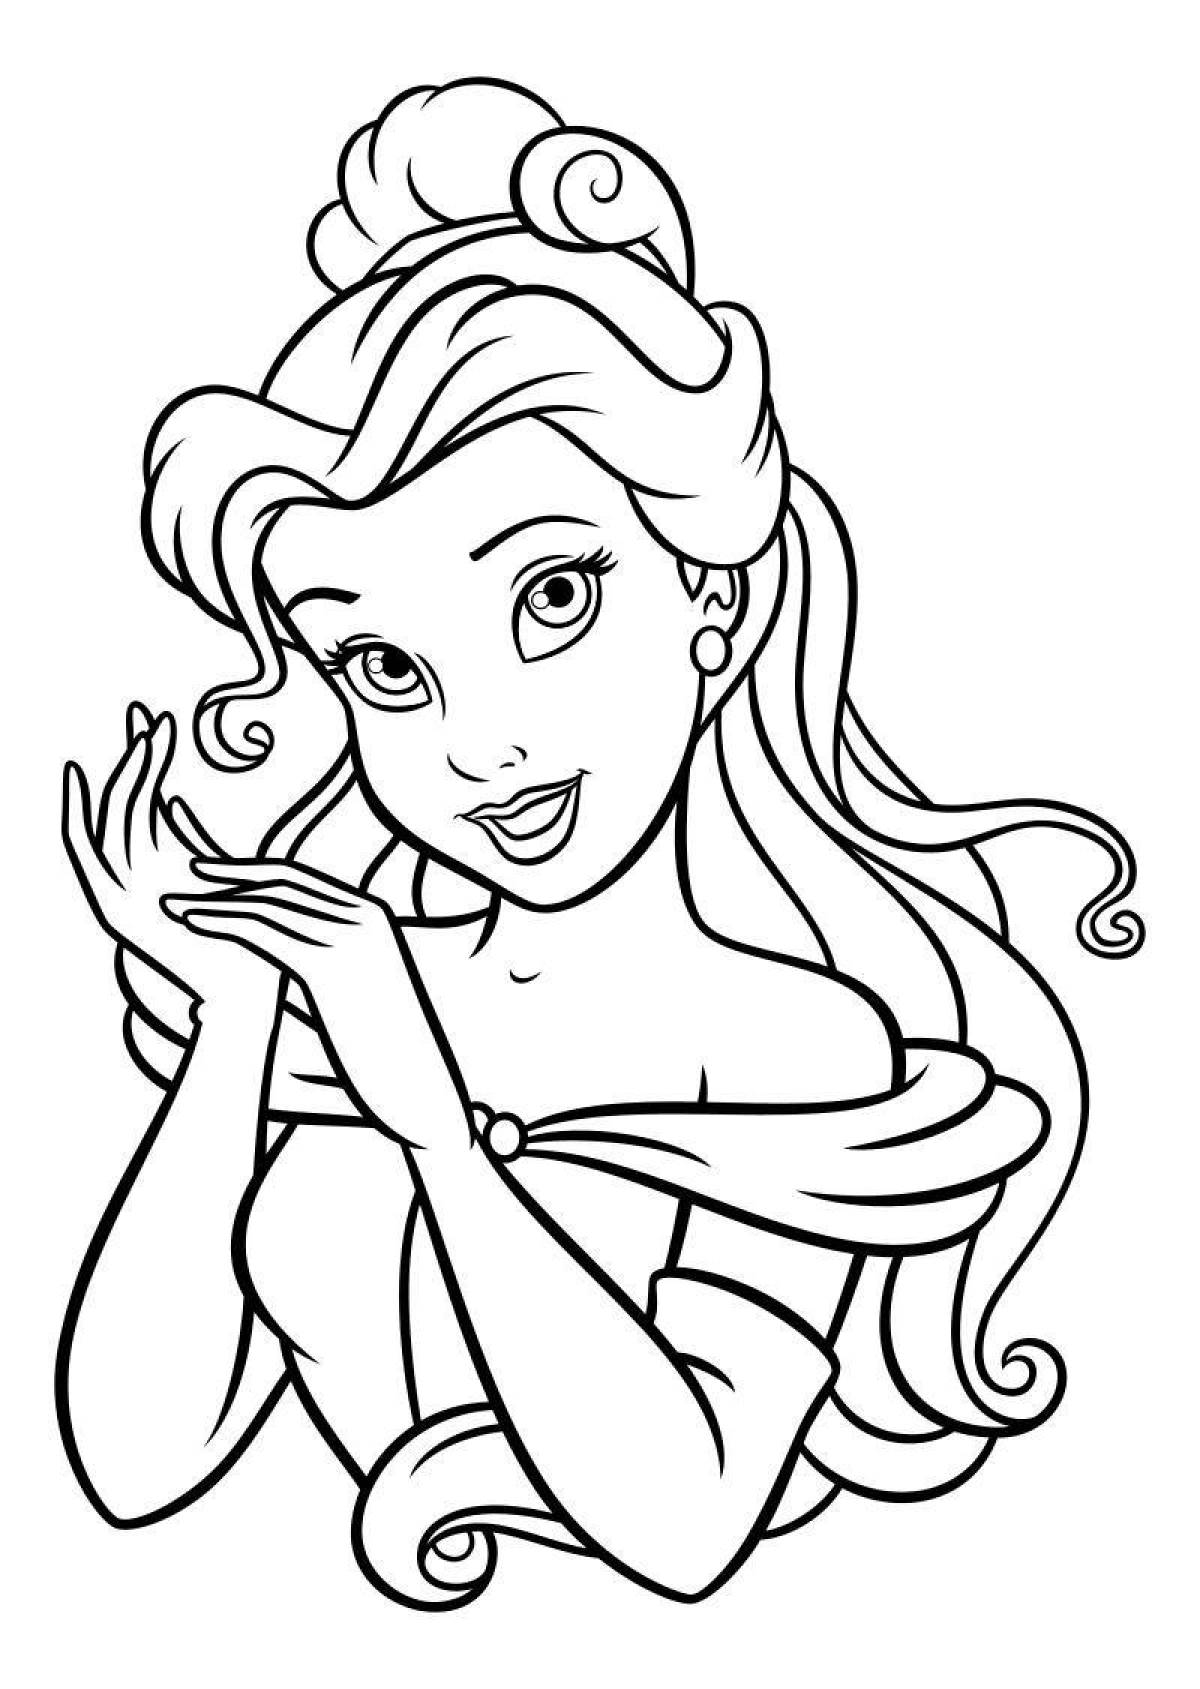 Disney girls fabulous coloring pages